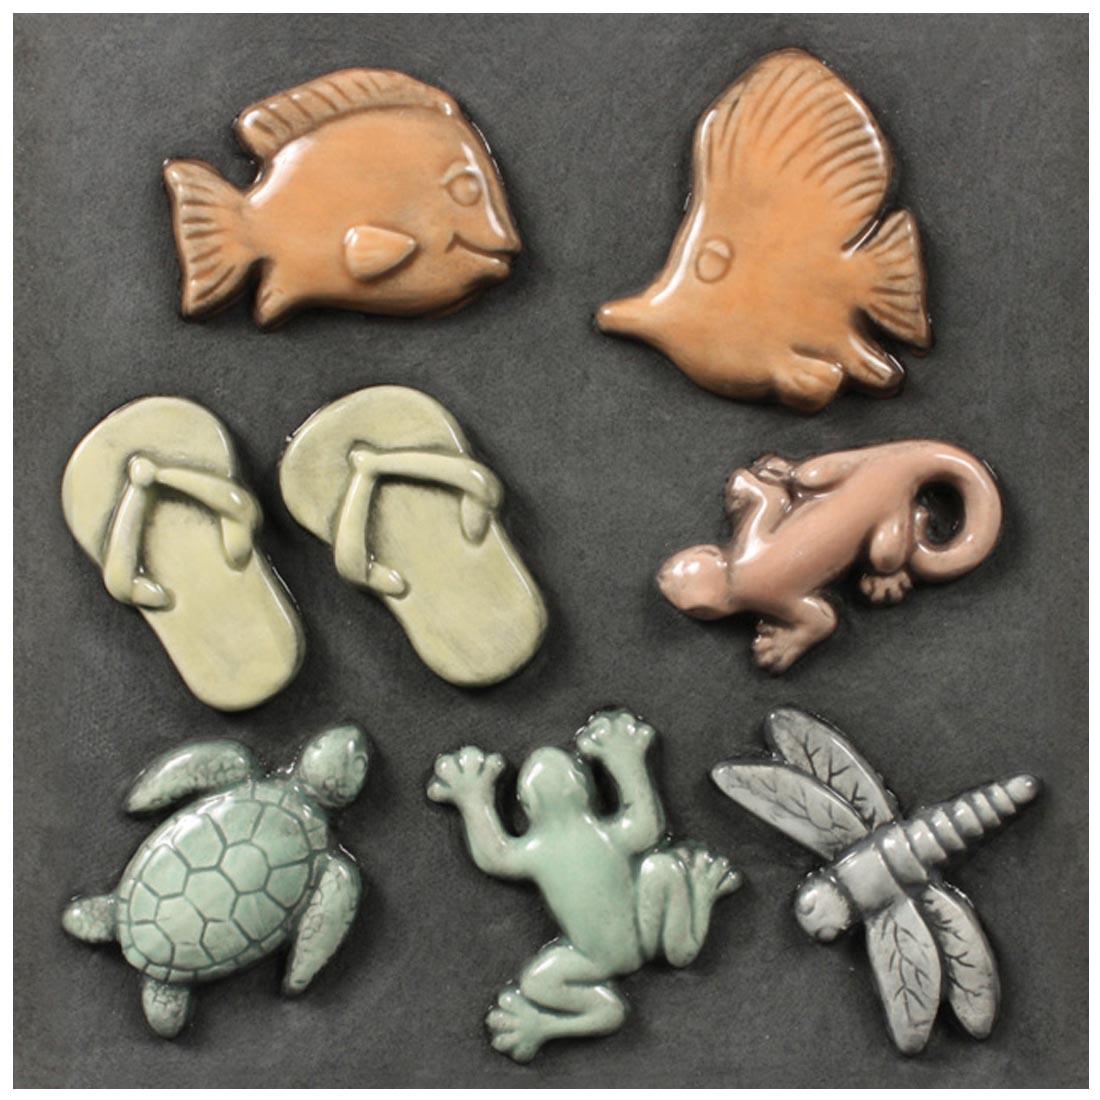 Clay pieces made with Mayco Aquatic Sprig Molds